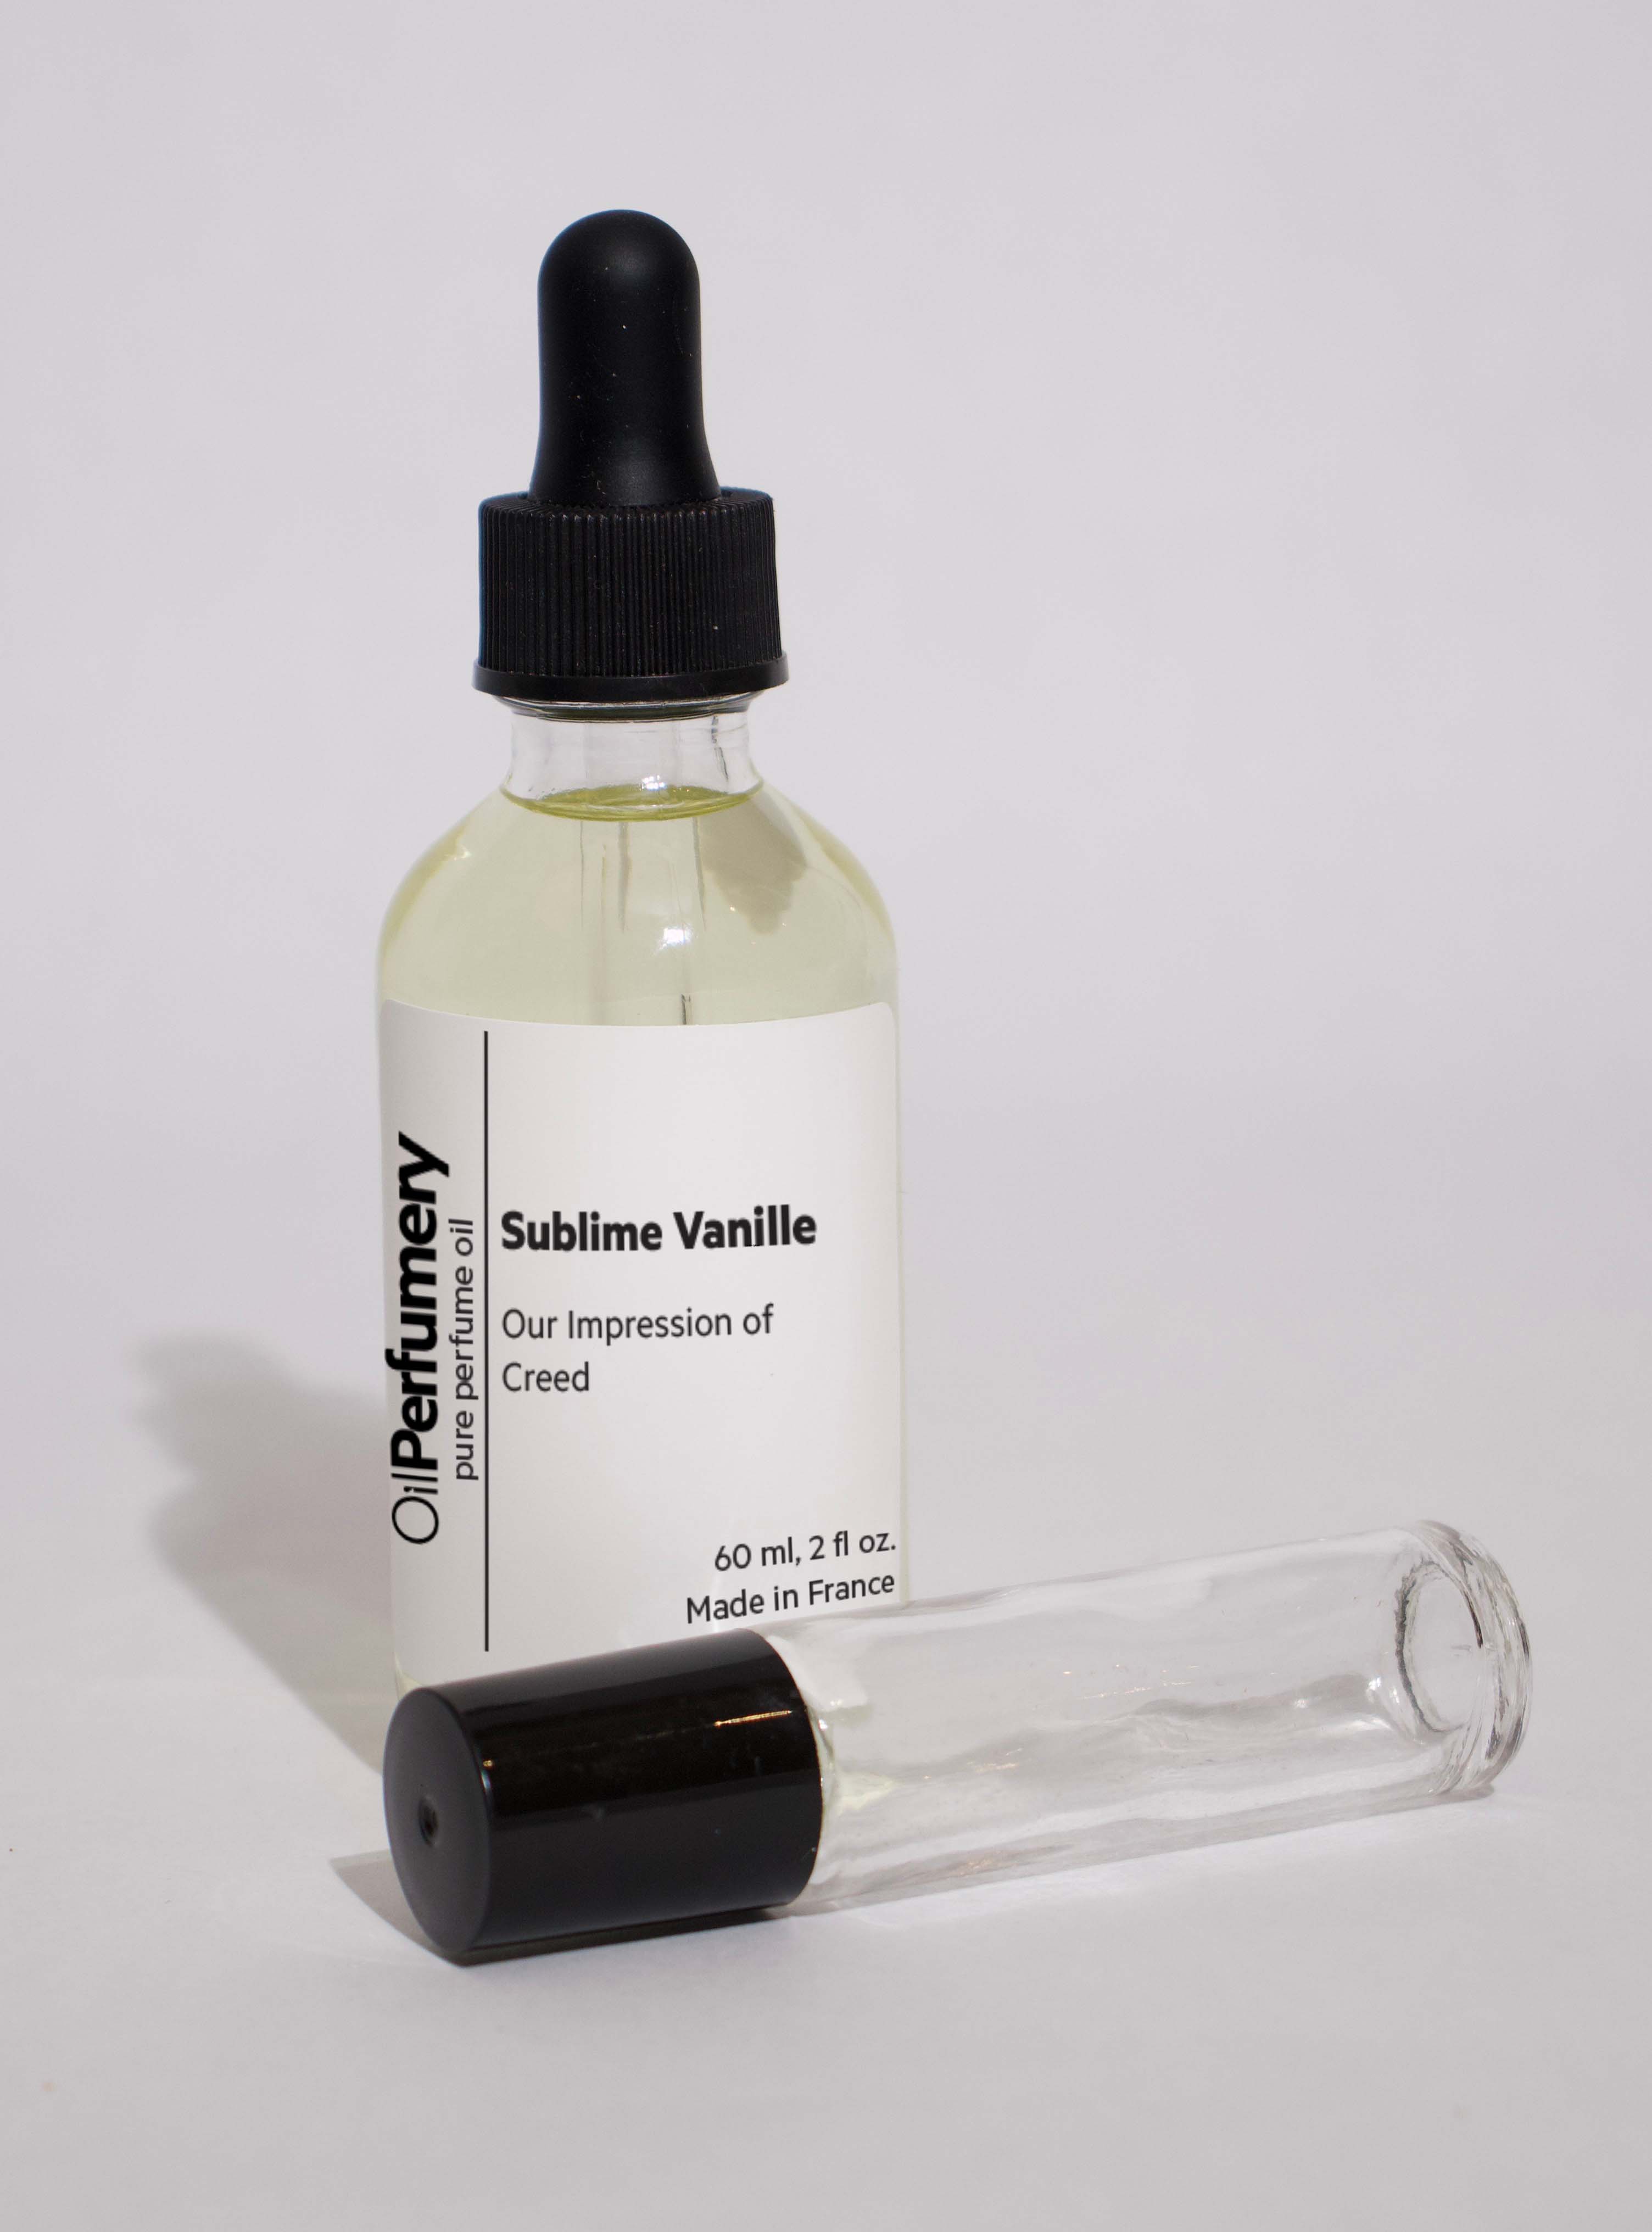 Oil Perfumery Impression of Creed - Sublime Vanille